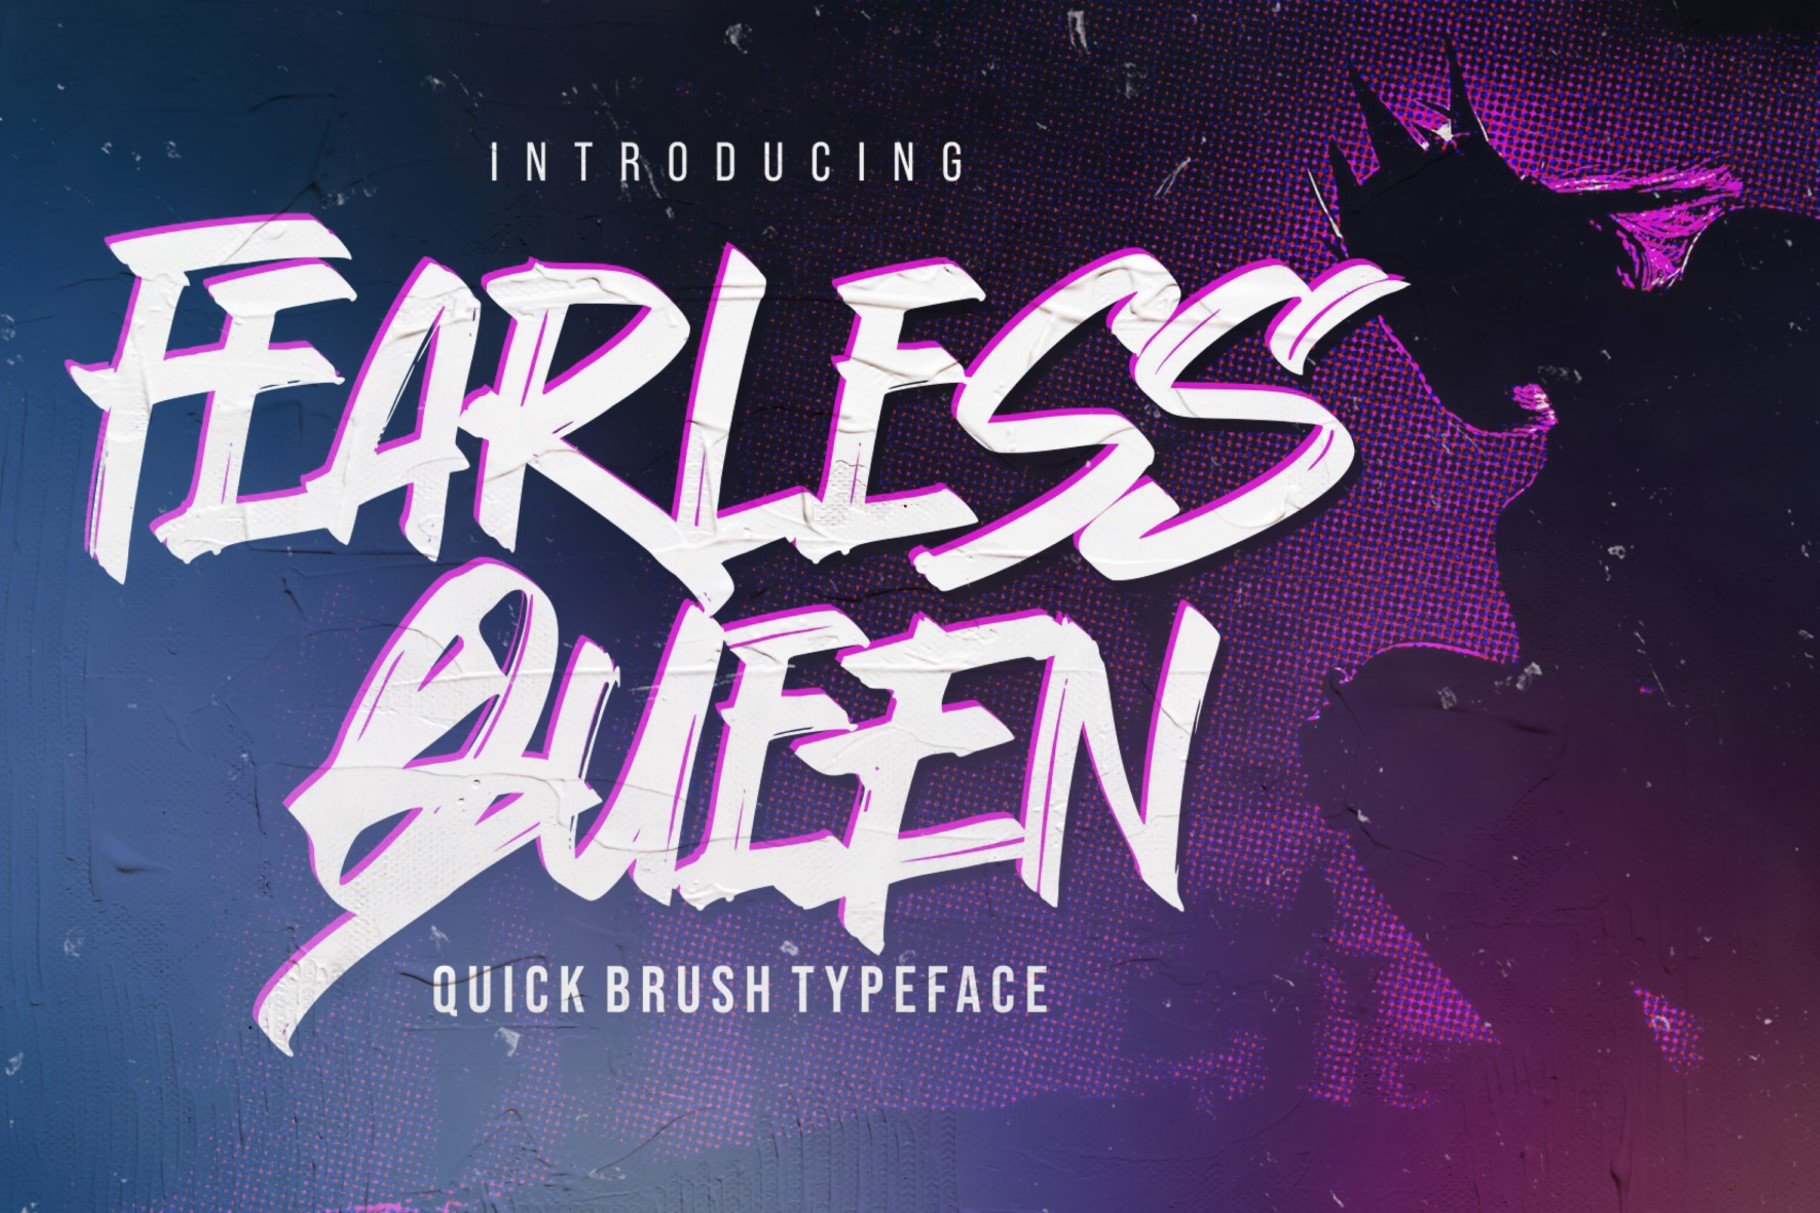 Fearless Queen - Graffiti typeface cover image.